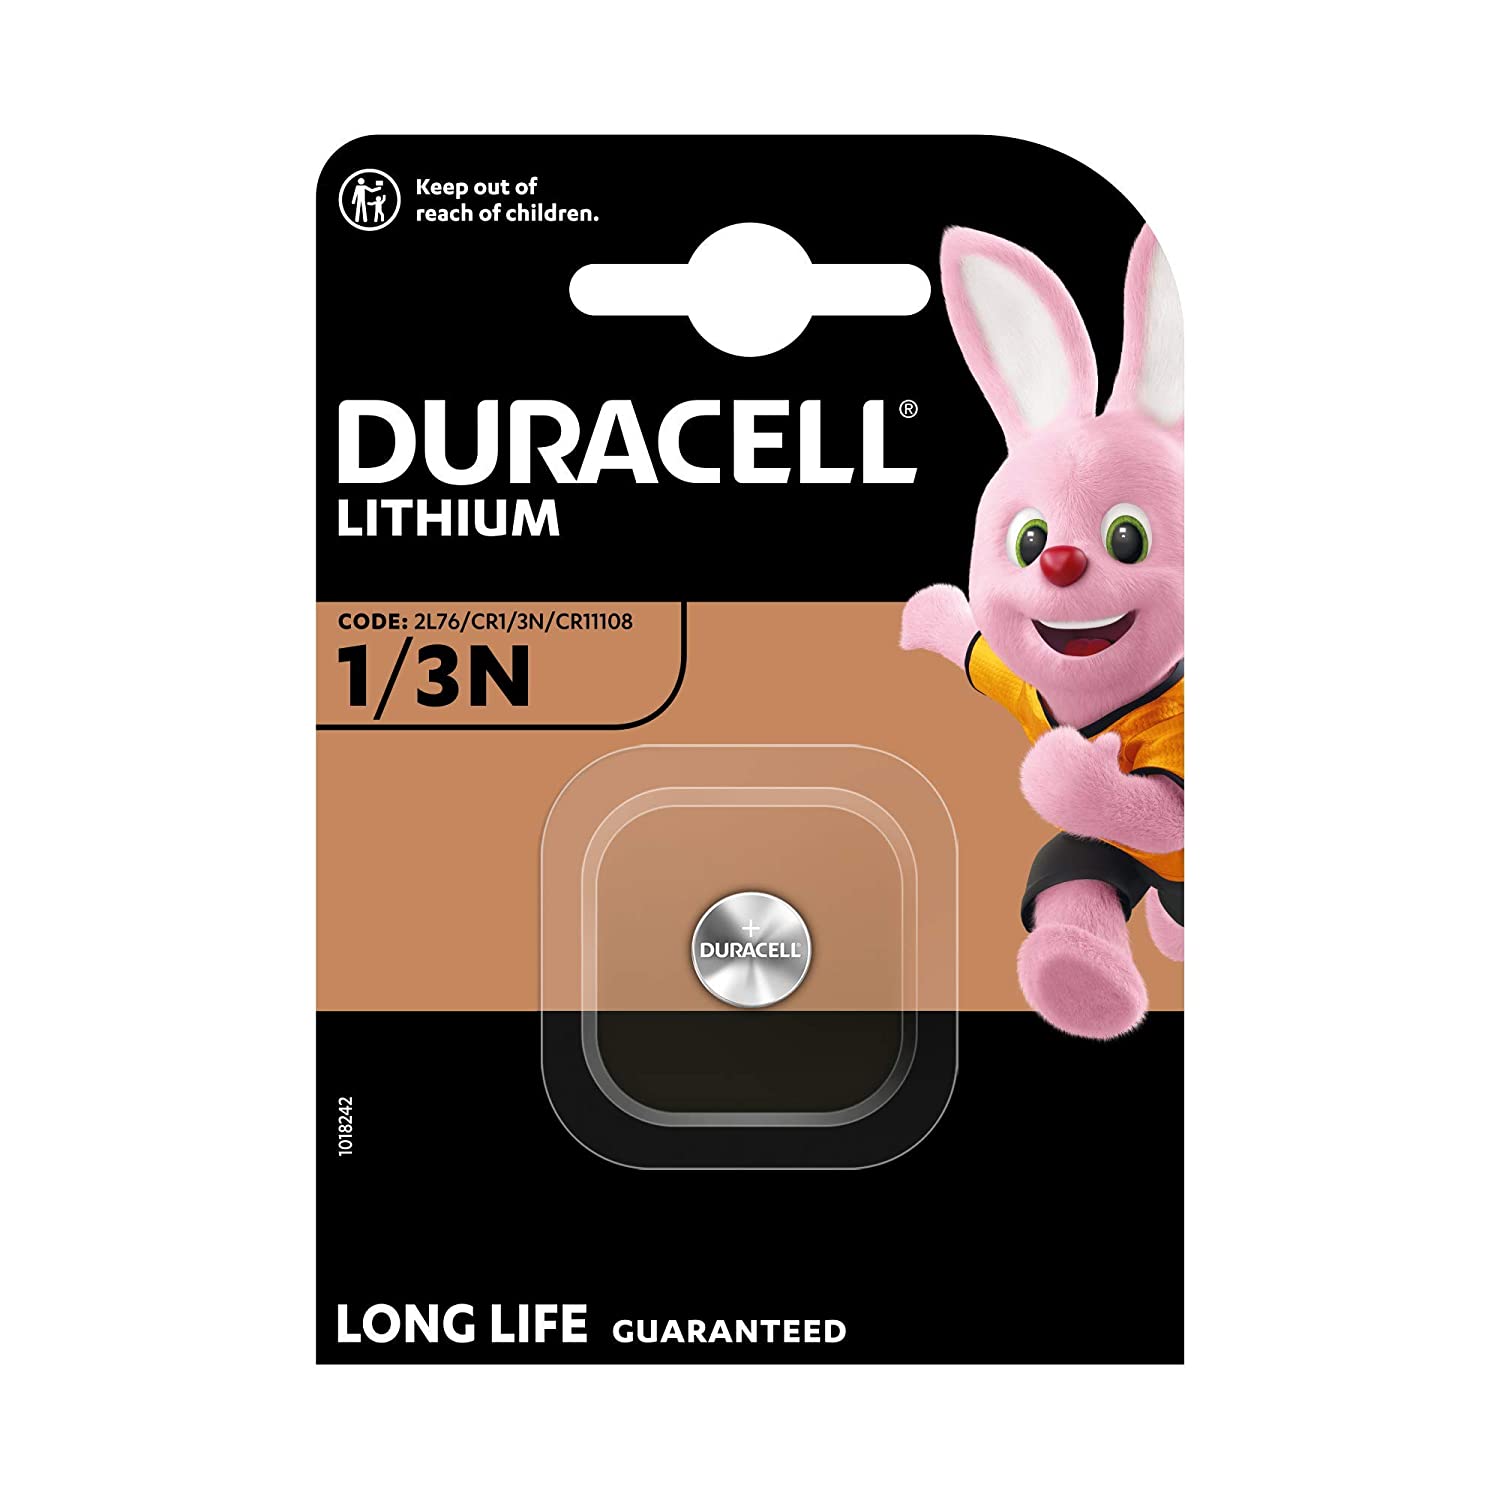 Duracell Specialty 1/3N High Power Lithium Battery 3V - Pack of 1